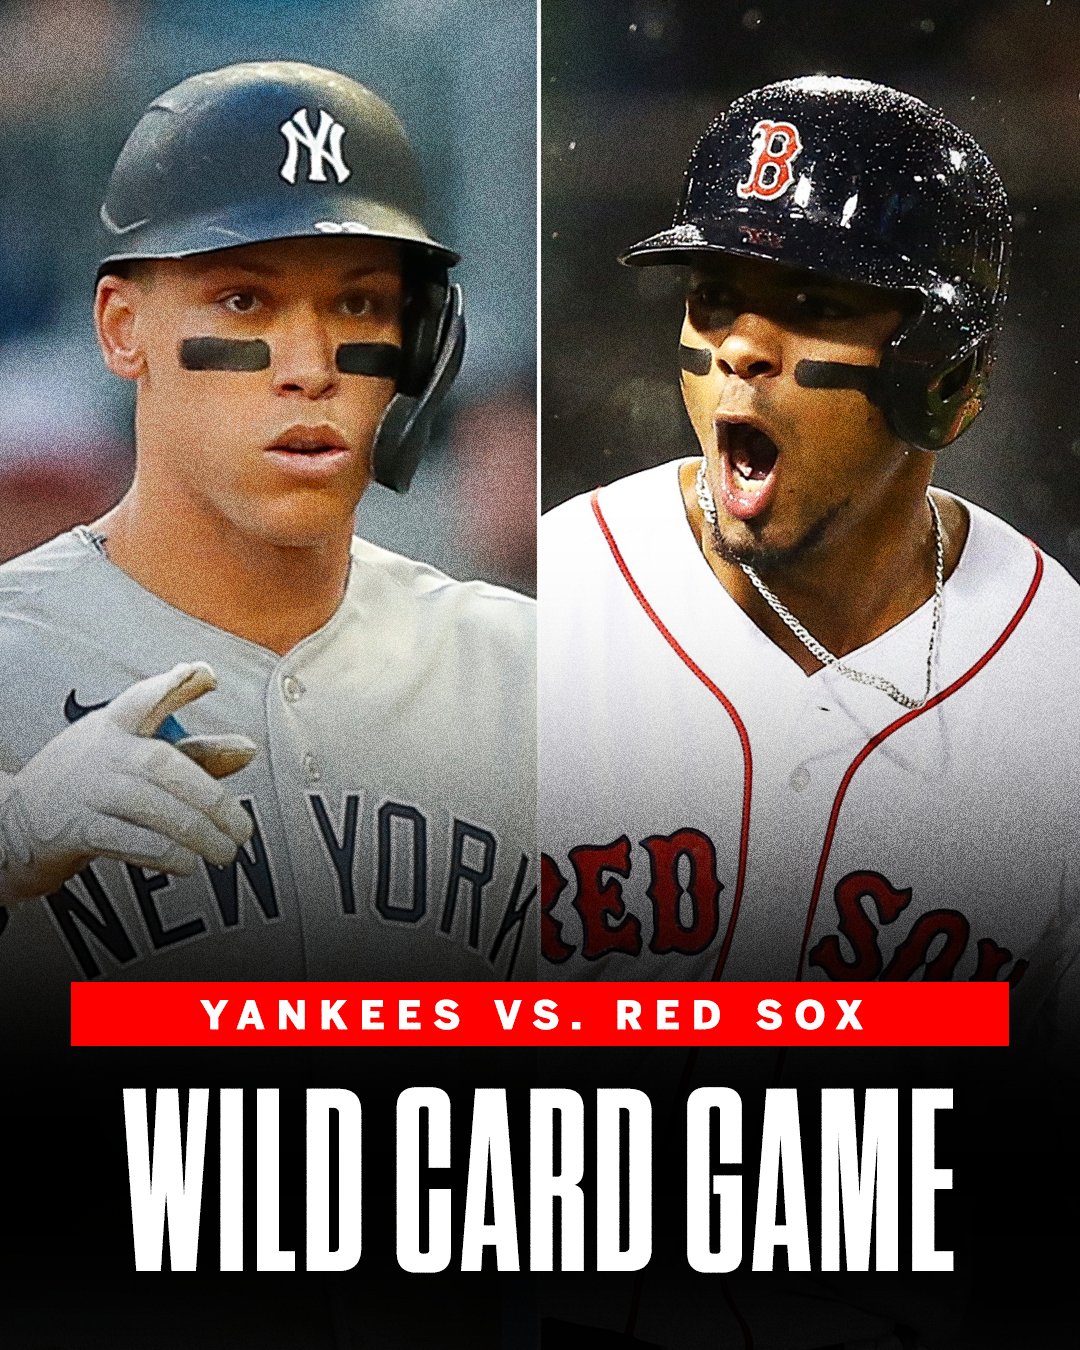 SportsCenter on Twitter: "IT'S YANKEES VS. SOX IN A BLOCKBUSTER AL WILD CARD GAME THIS TUESDAY‼️ WINNER-TAKE-ALL 🍿 https://t.co/V2uiH4T8rt" / Twitter